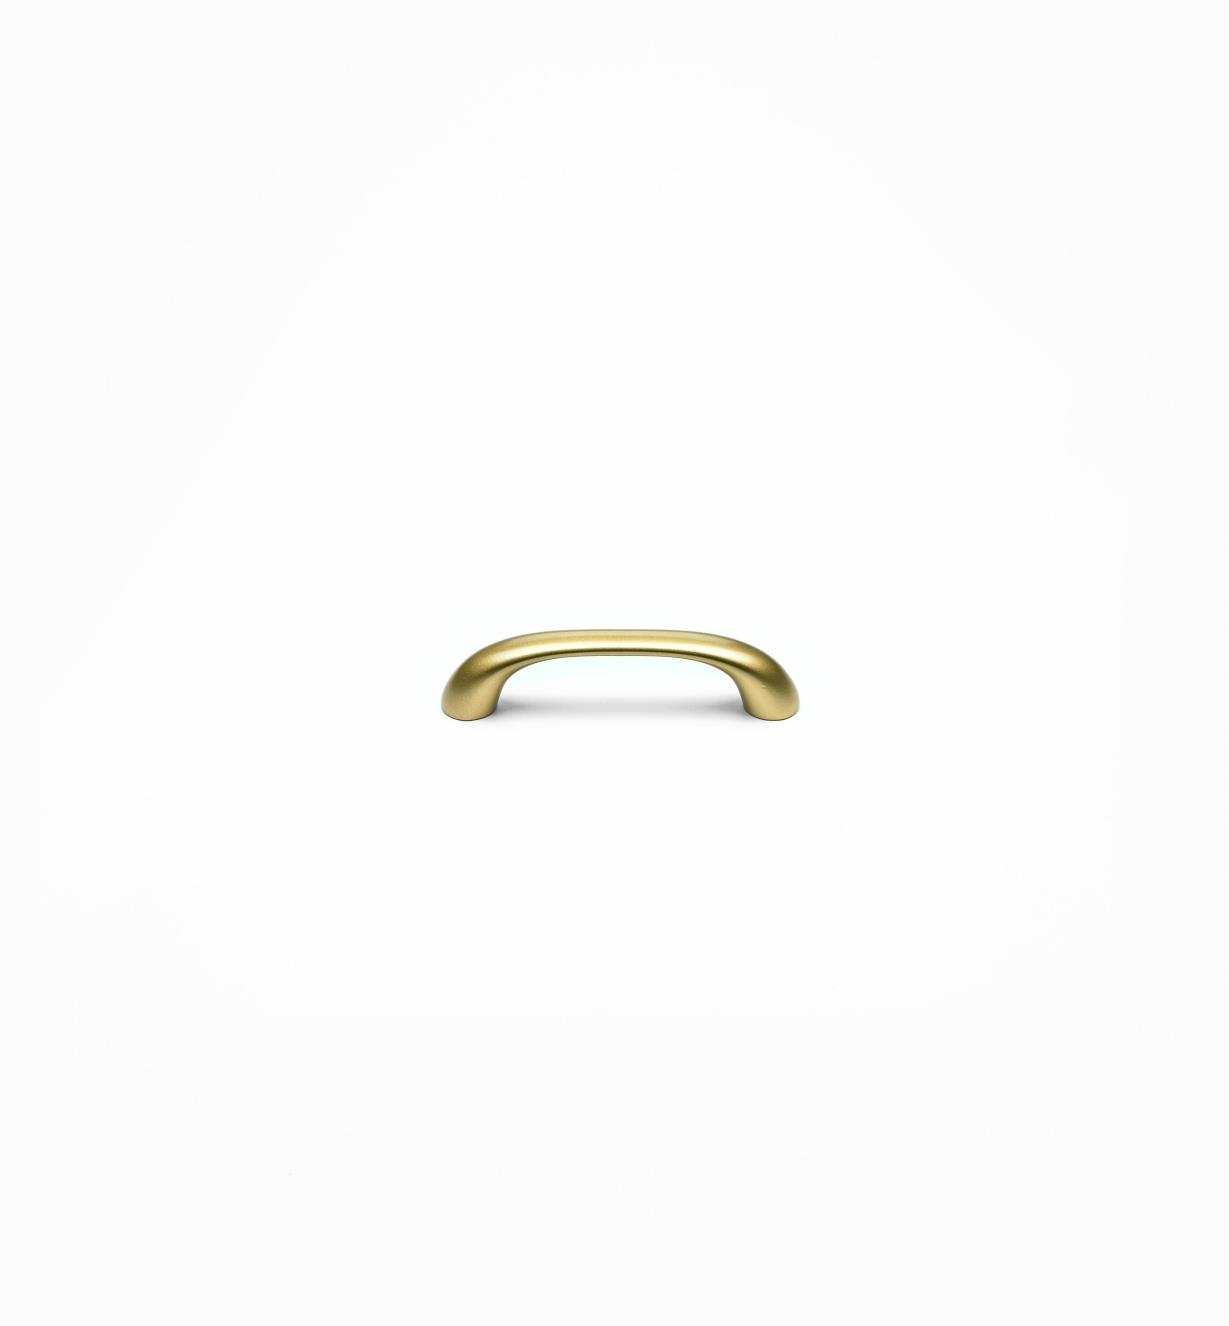 00A2946 - 96mm Gold Handle